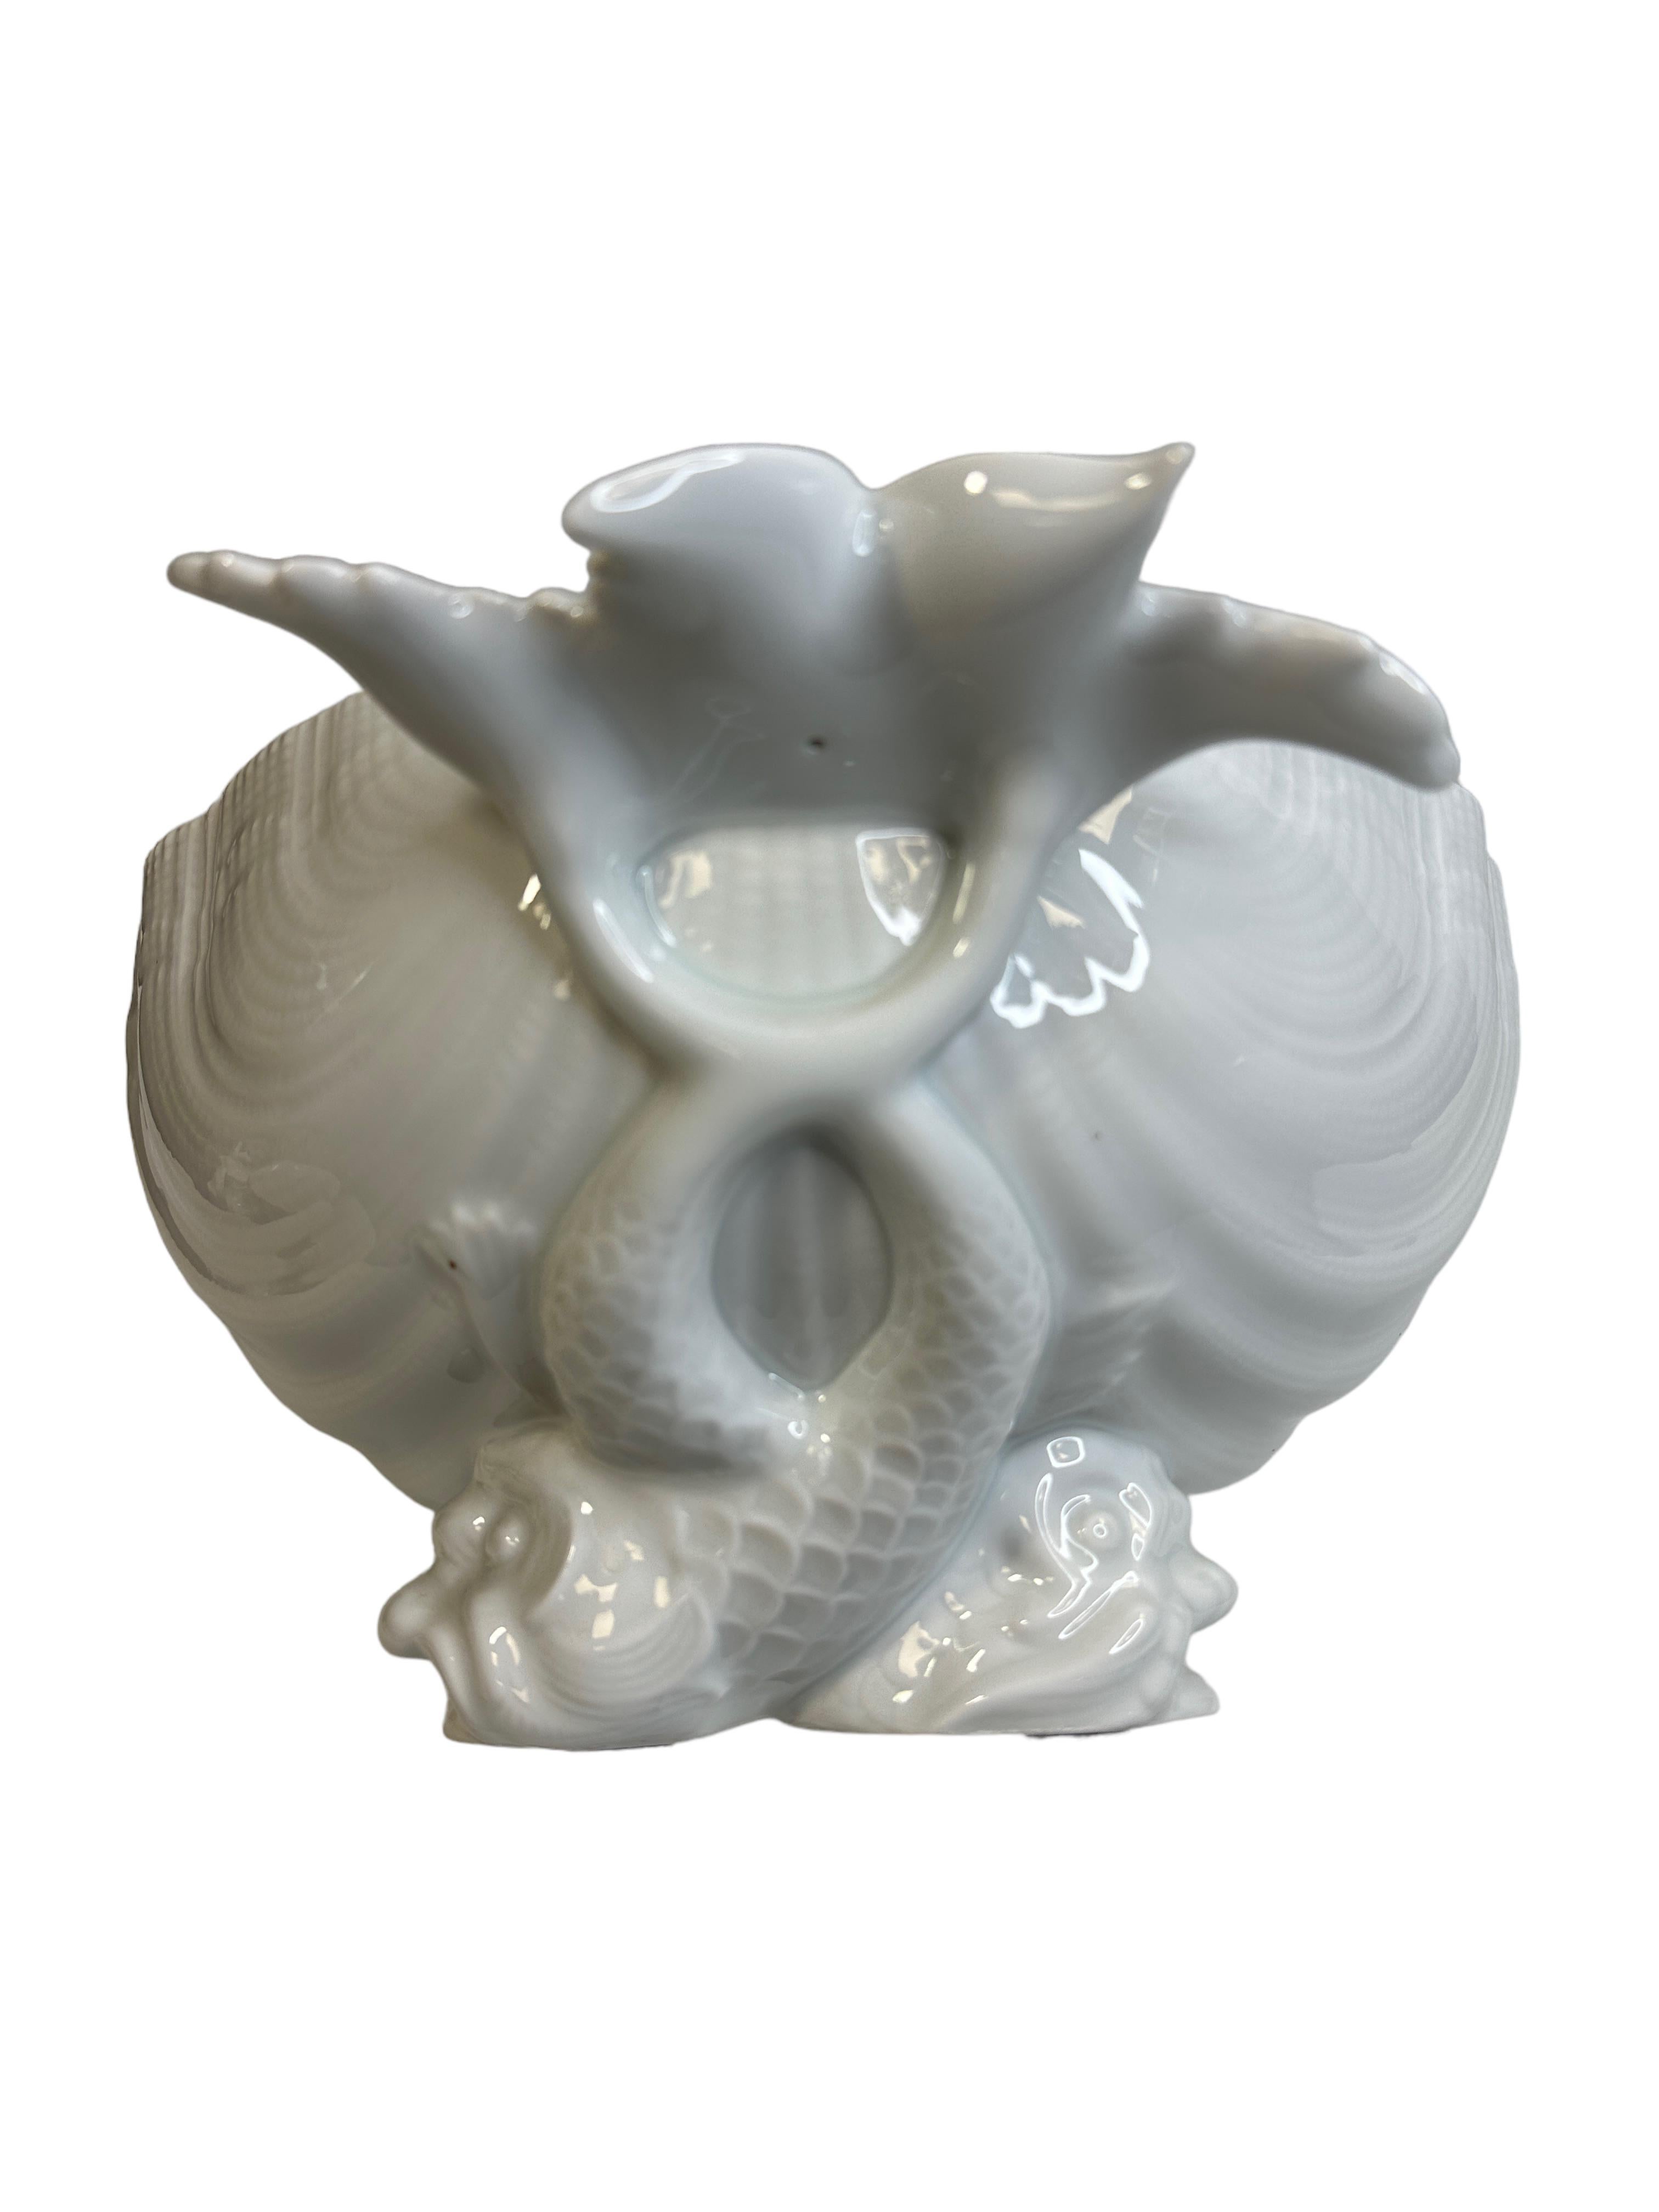 Exceptional Shell Shaped Limoges China Porcelain Soup Tureen with Dolphin Decor For Sale 4